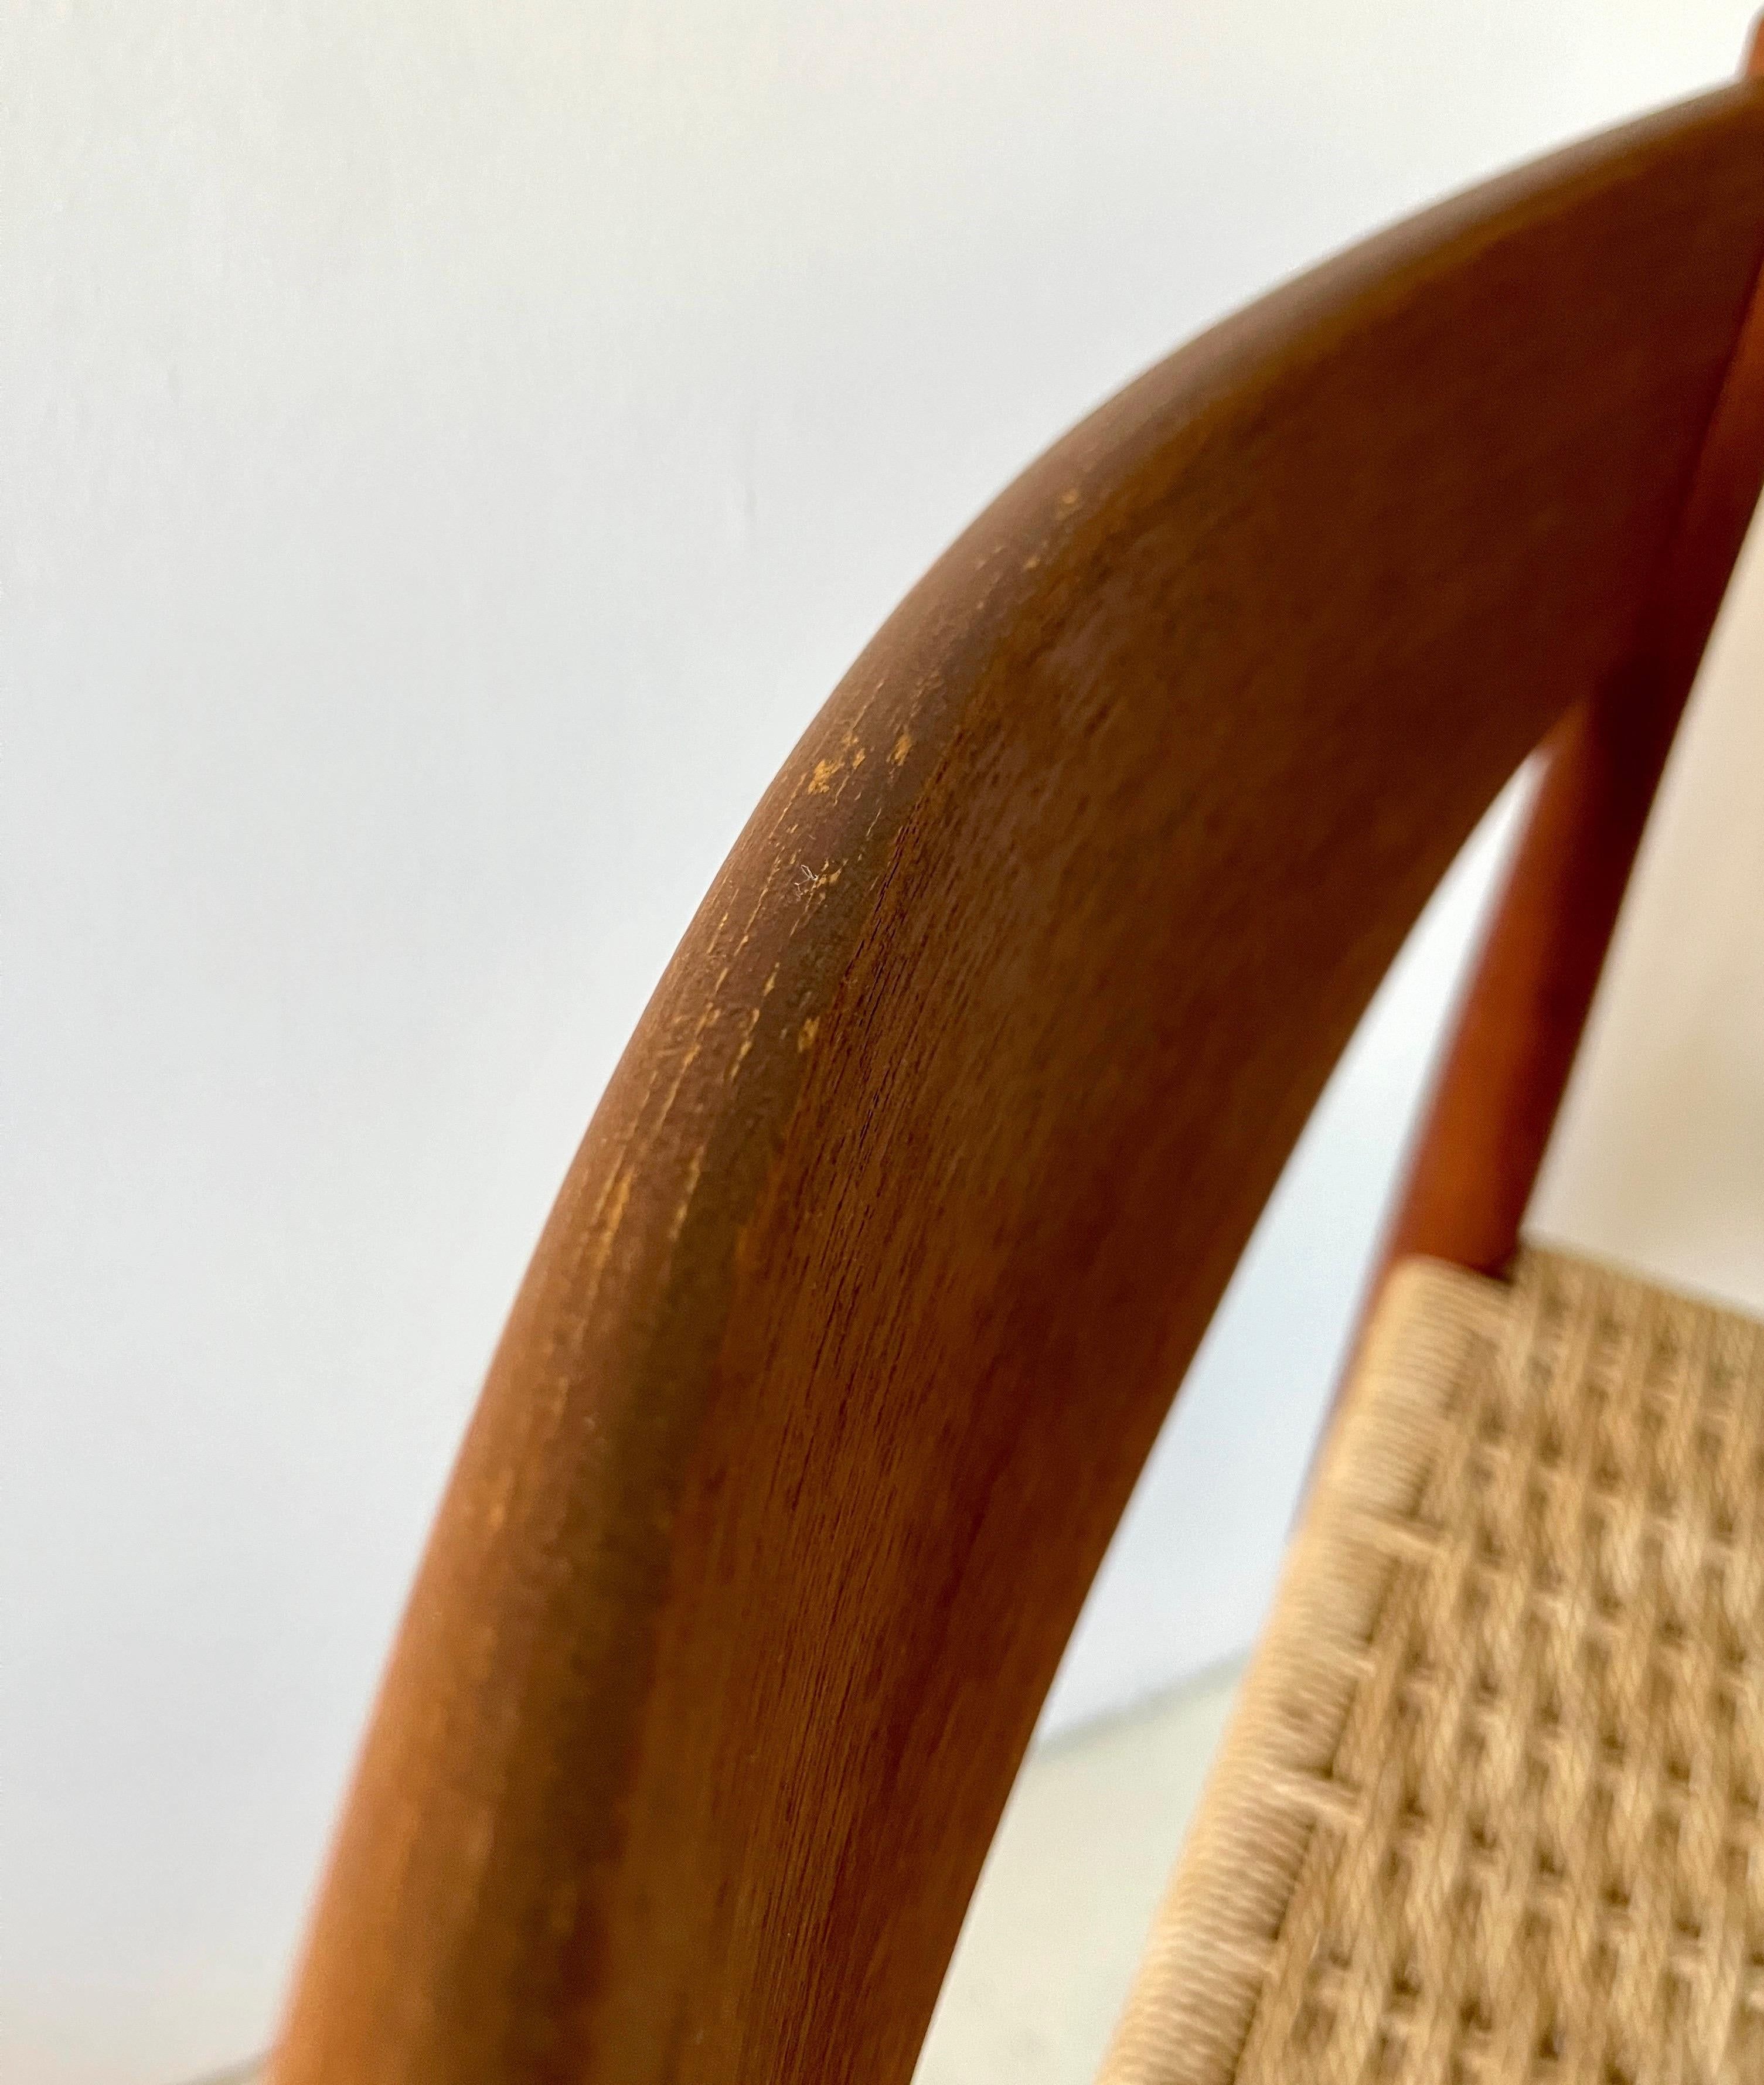 Teak Danish Modern Dining Chair by Poul Volther for Frem Røjle  For Sale 4